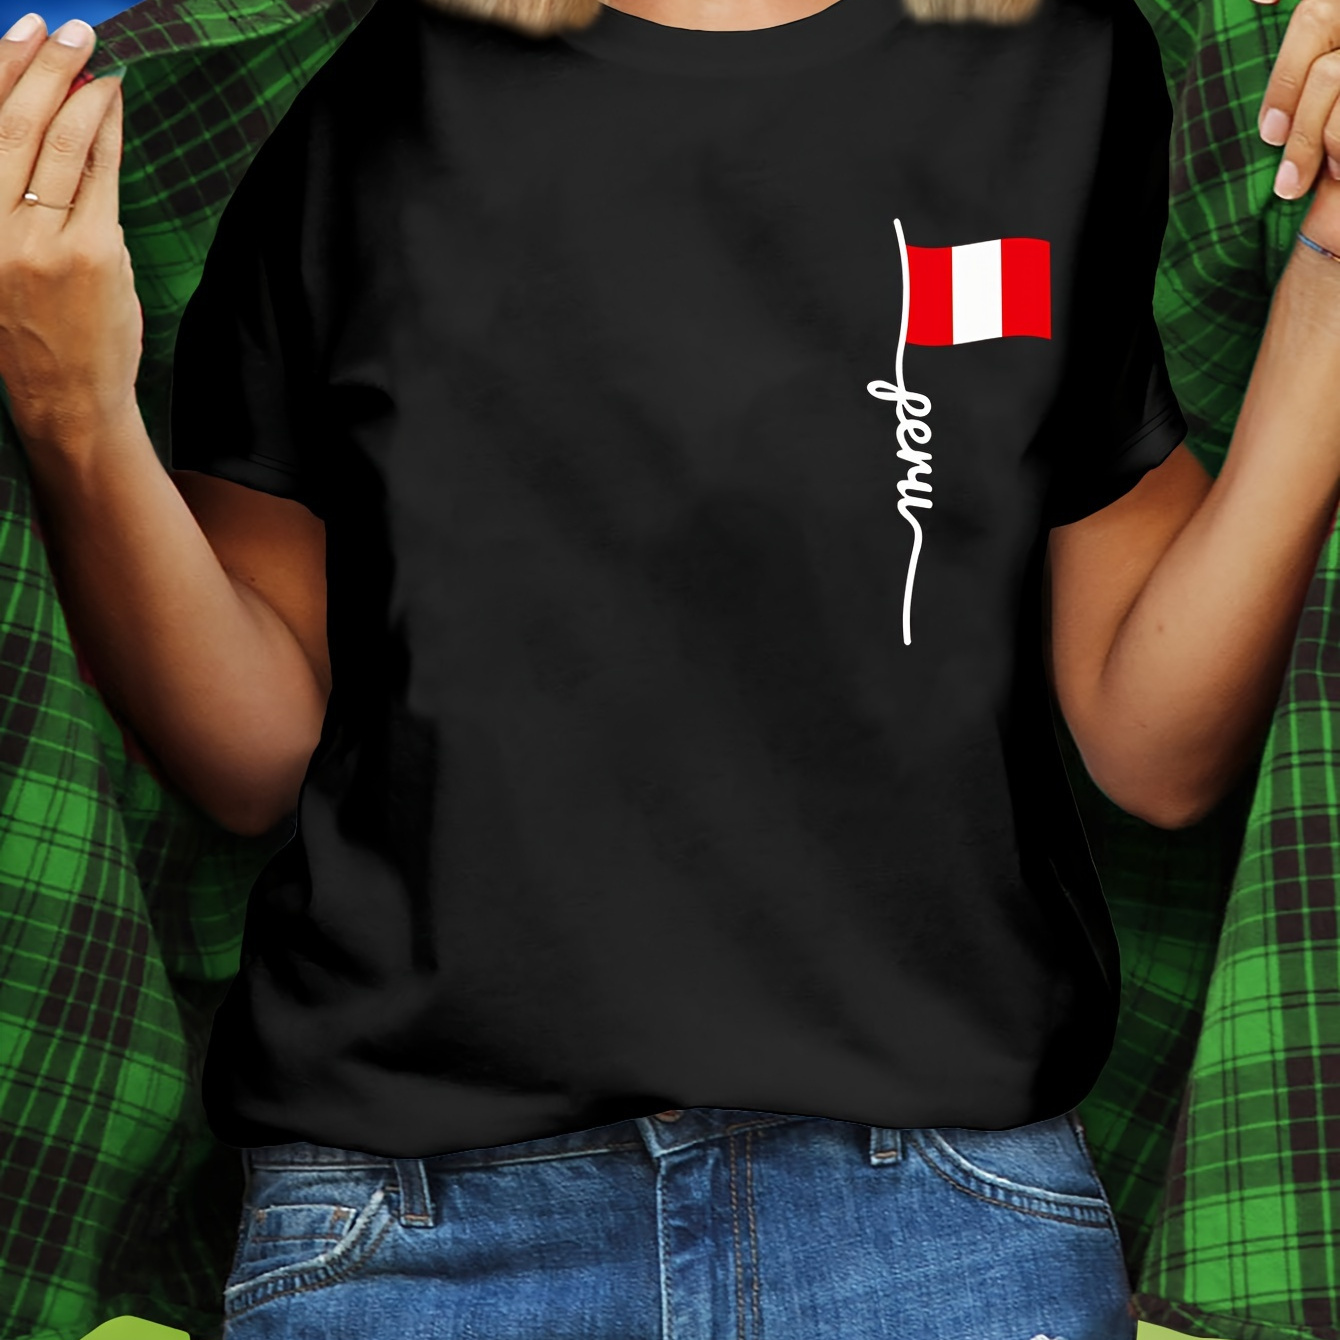 

Women's T-shirt With Peru Flag, "amor" Script, Casual Tee Peru National Team Supporter Gear For Euro Sports Event